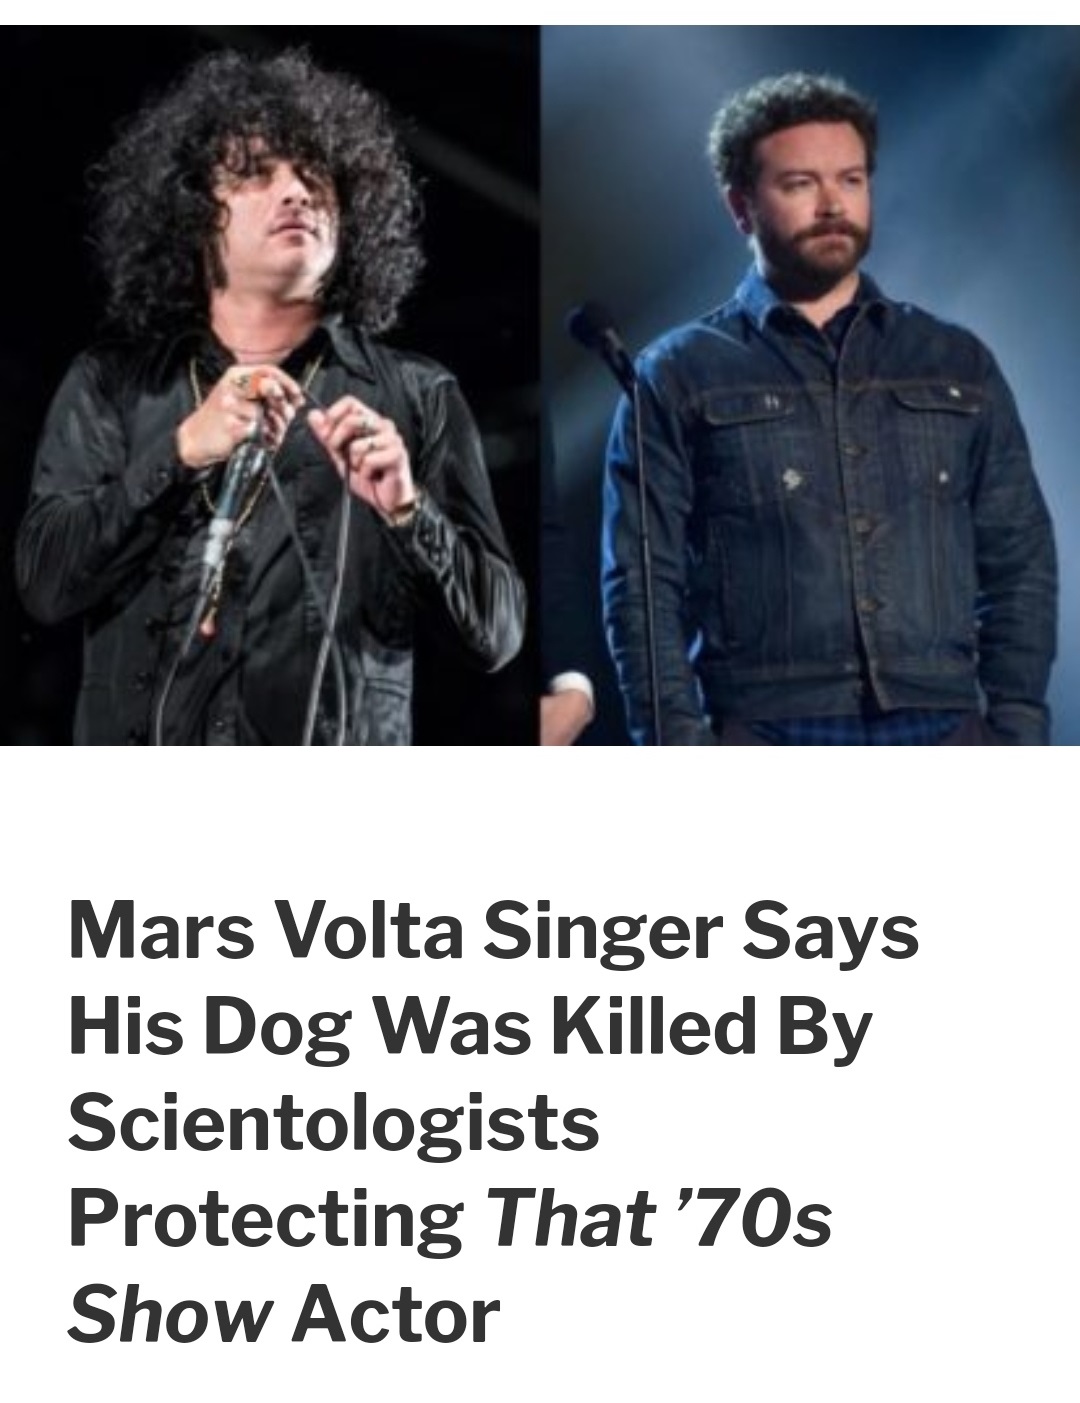 fur - Mars Volta Singer Says His Dog Was Killed By Scientologists Protecting That '70s Show Actor